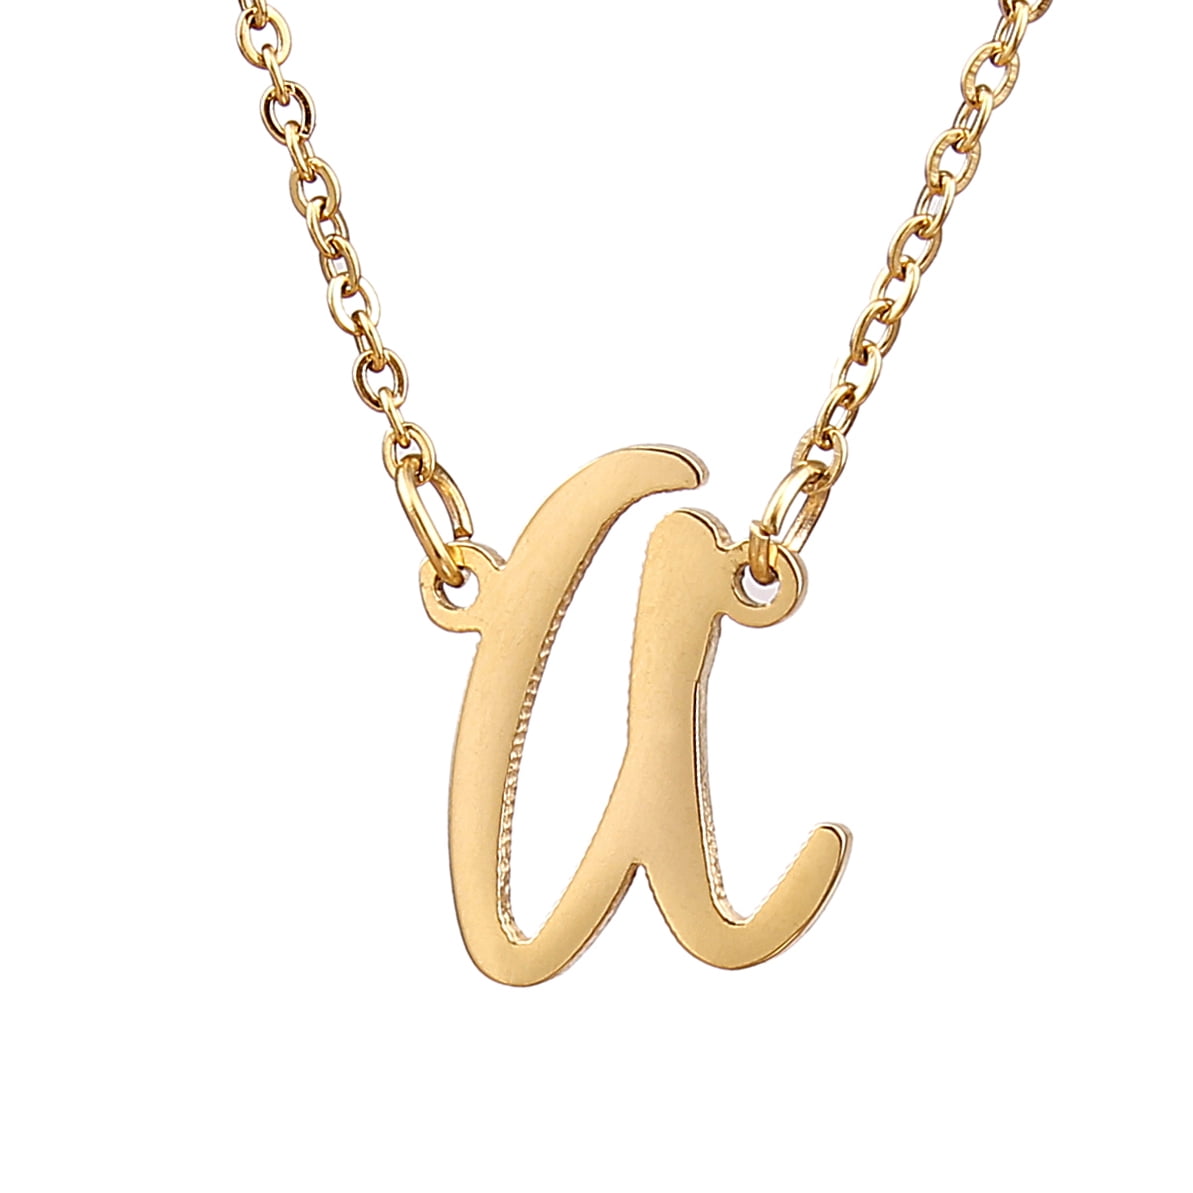 1pcs New Real 18K Gold Curb Extended Chain 3cm For Necklace 3 metal available 